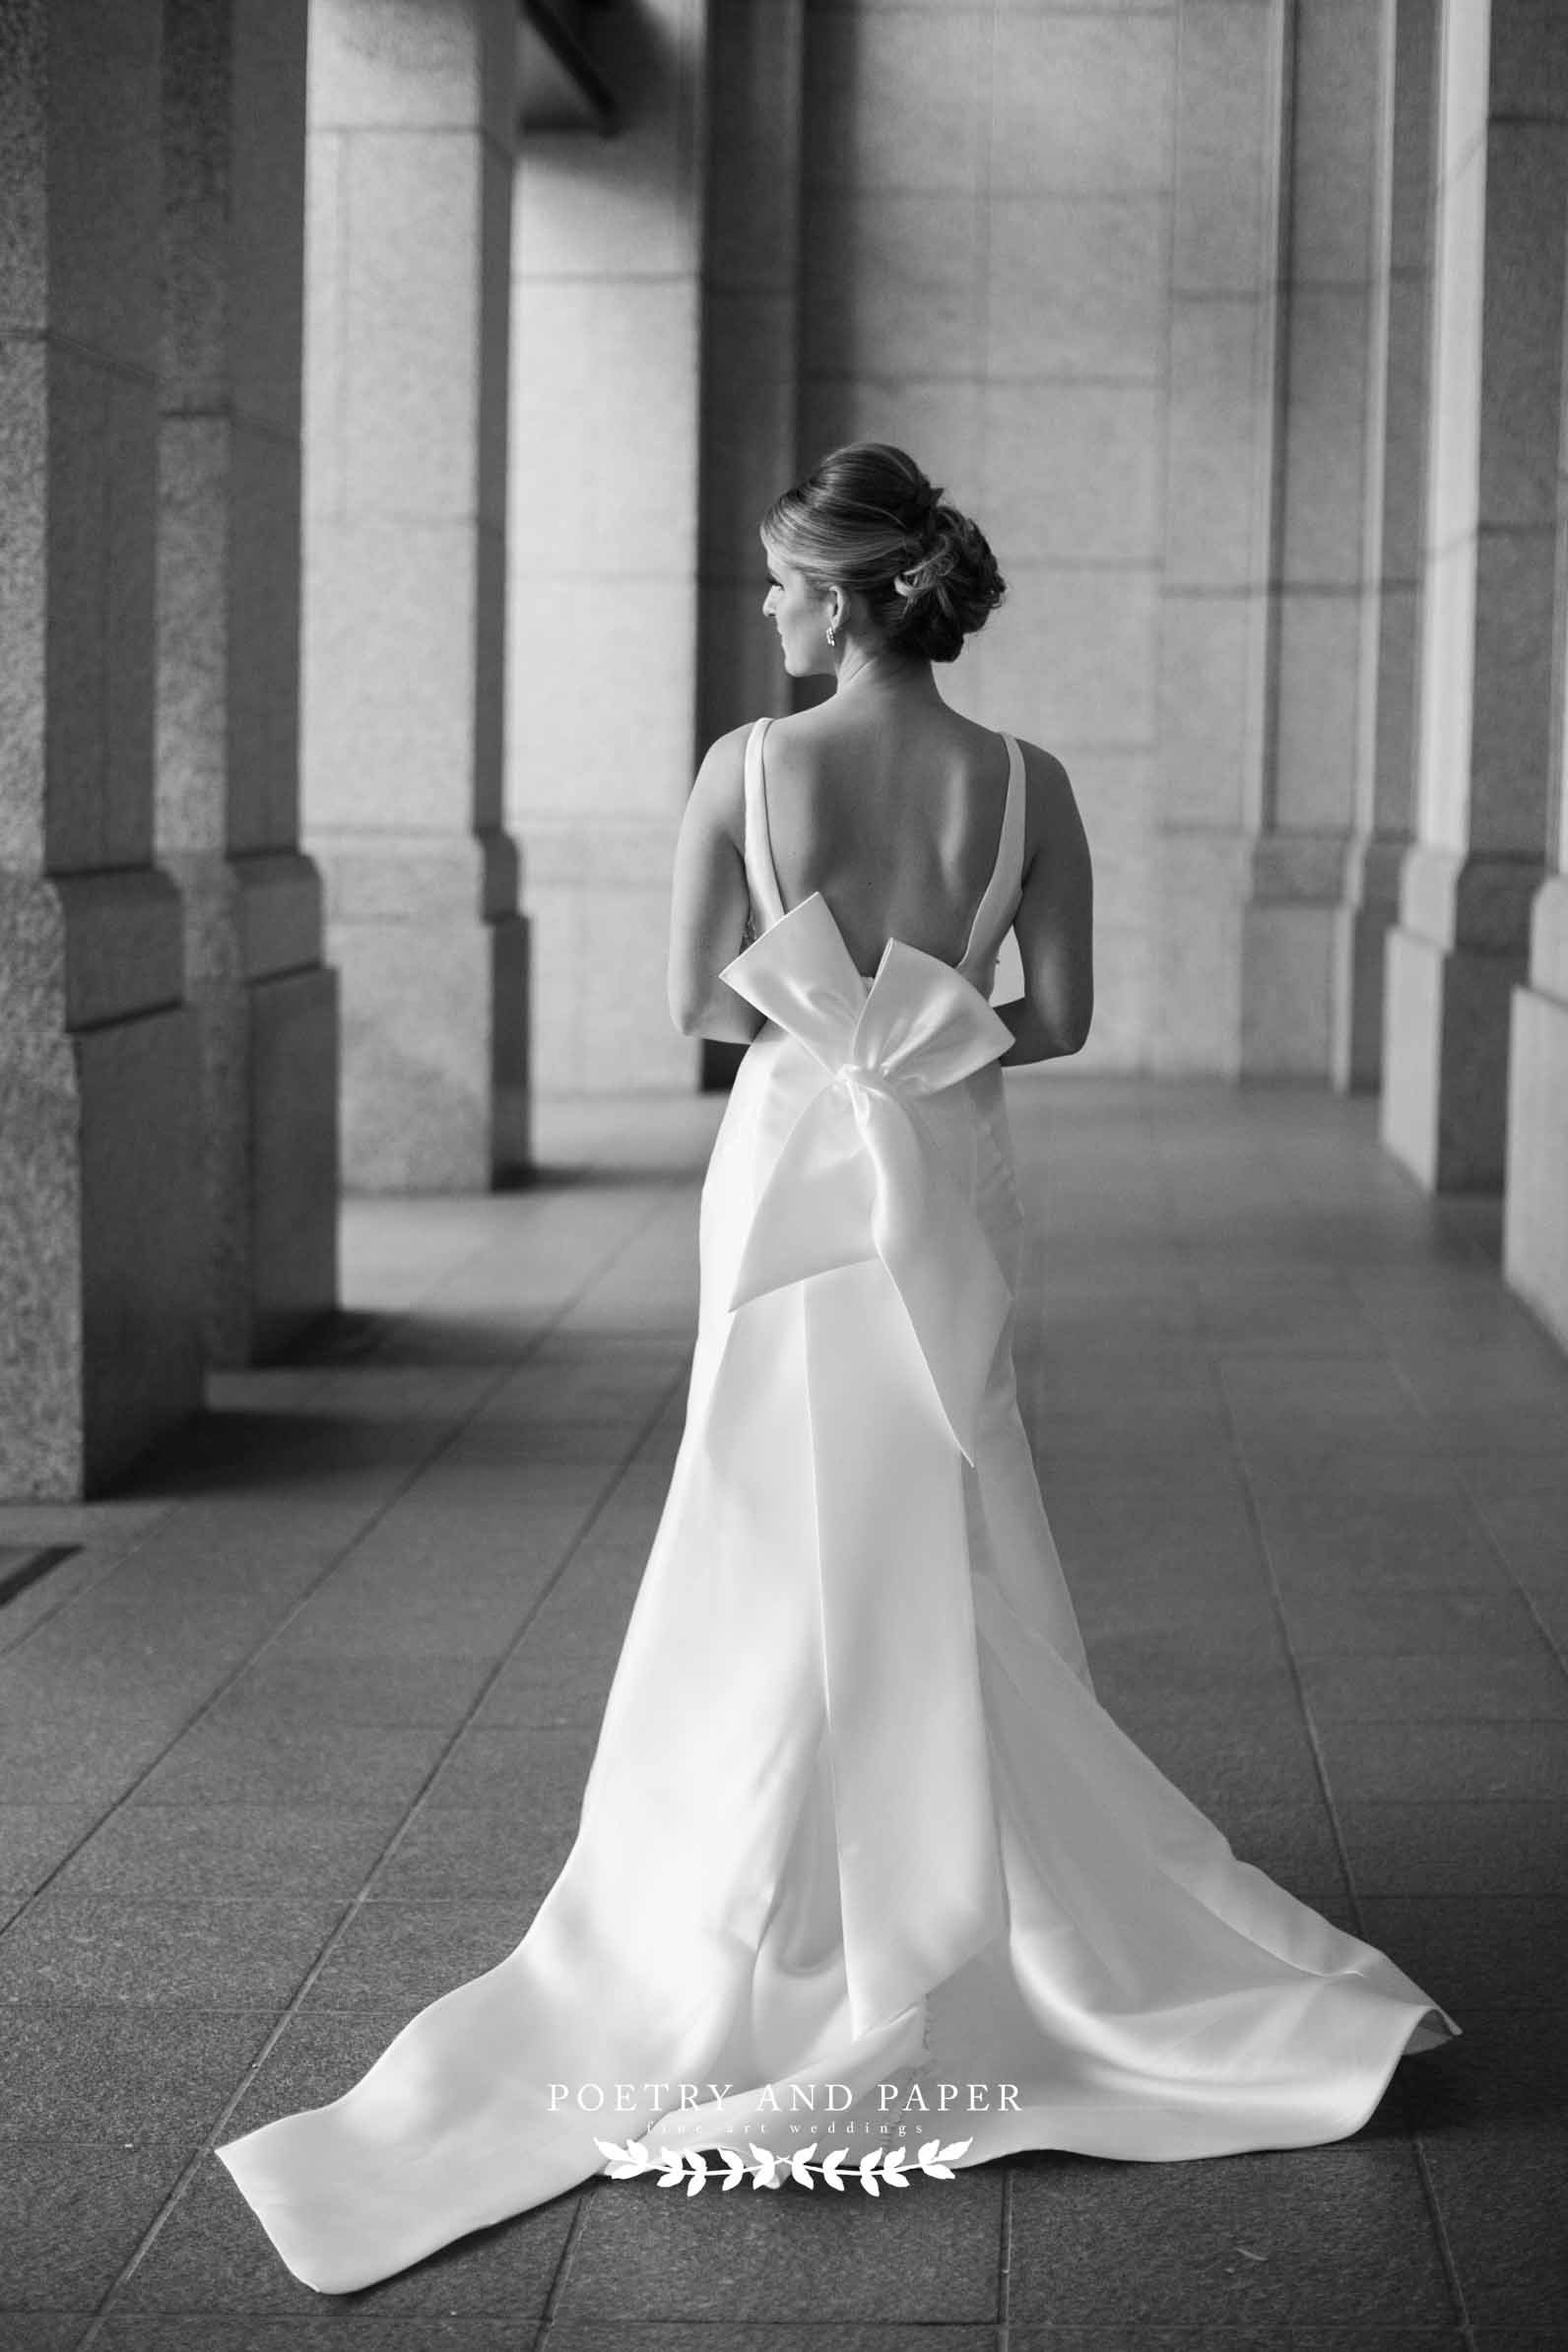 Top Destination Wedding Photographer- Timeless- Poetry and Paper- Dawn Johnson based in Atlanta,Ga- black and white bride with low back dress.jpg